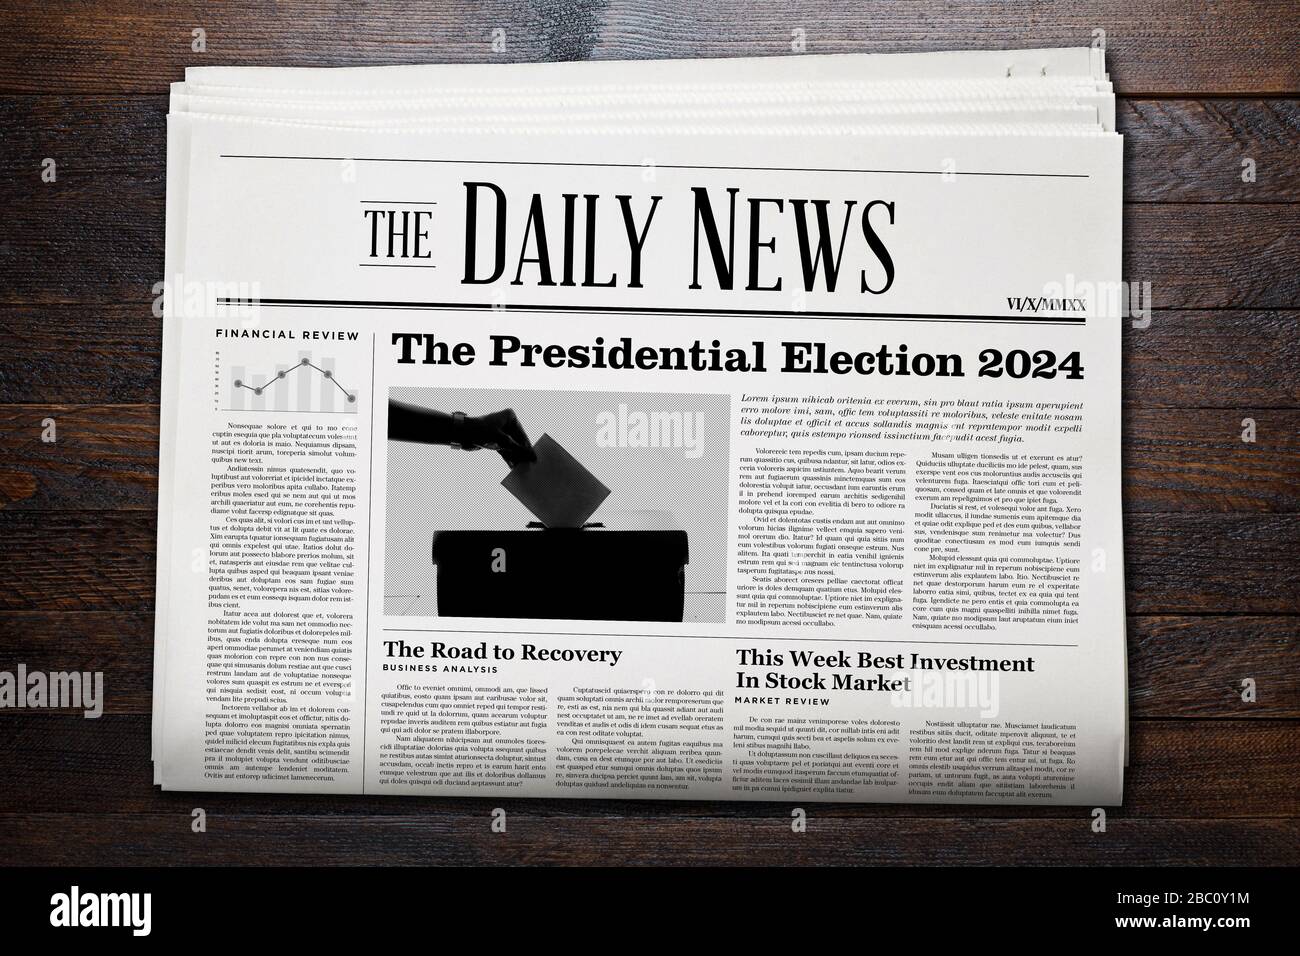 Presidential Election 2024 News On Daily Newspaper 2BC0Y1M 